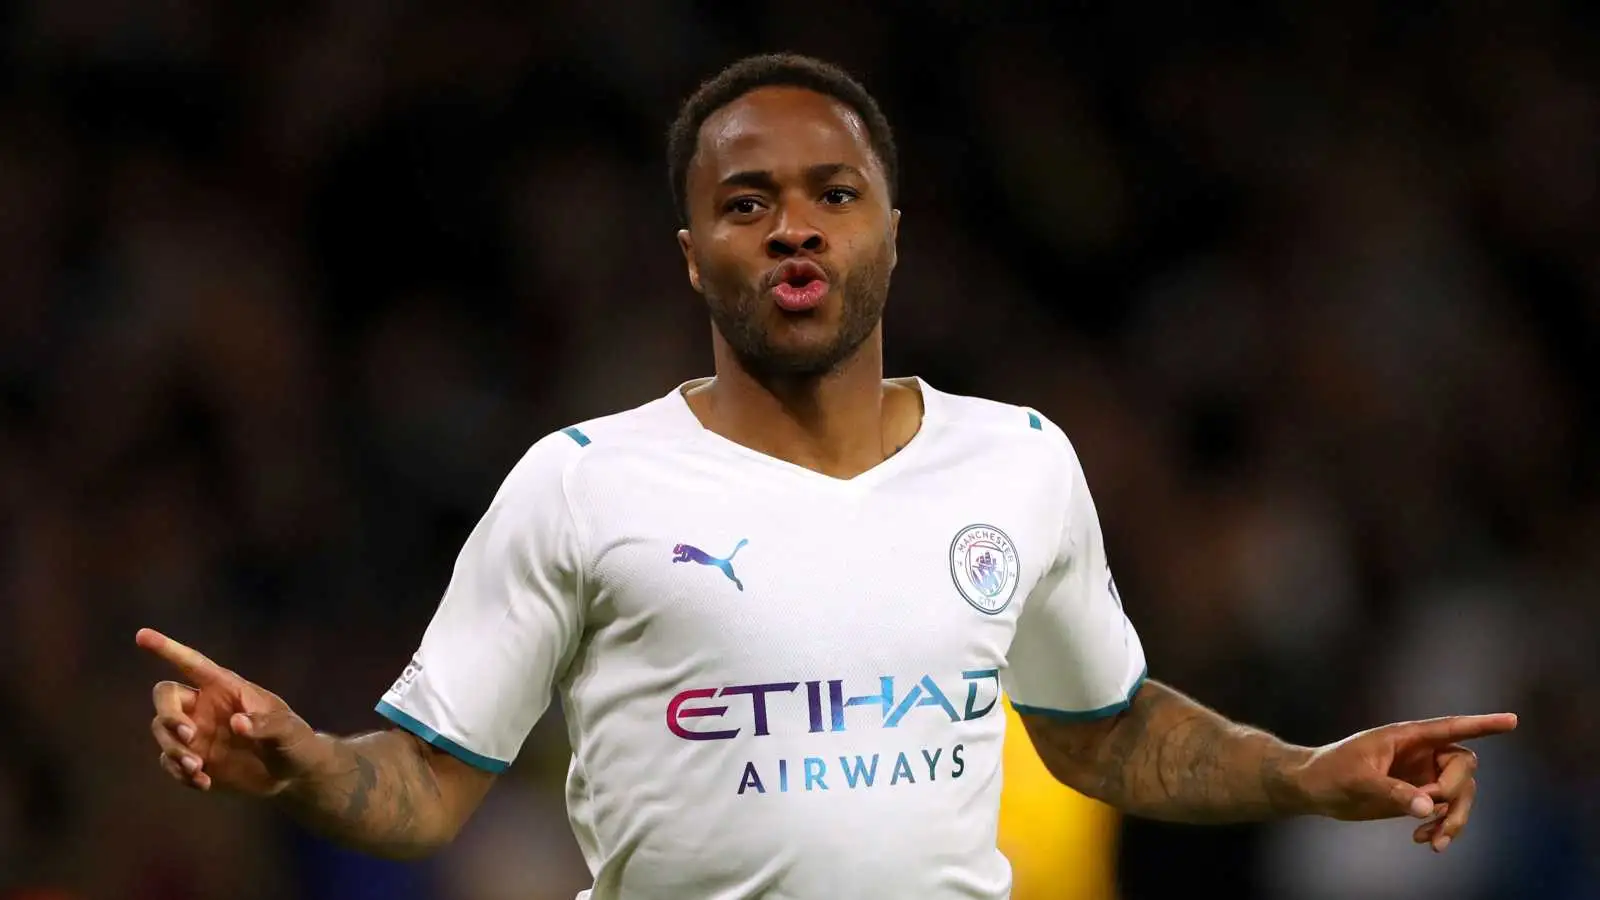 Raheem Sterling celebrates a goal for Manchester City